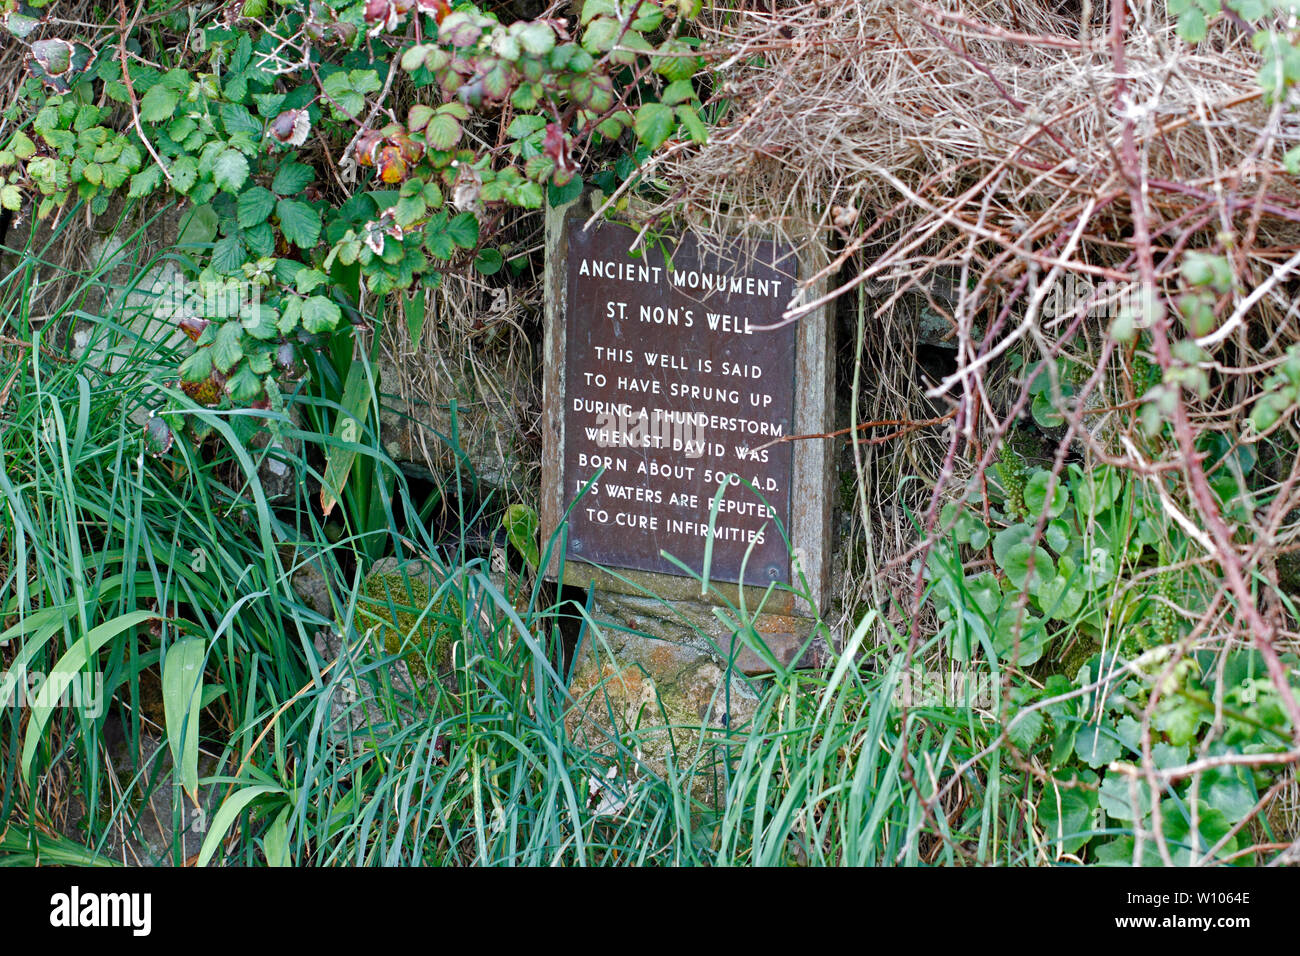 St Non's Well, Pembroekshire, West Wales, UK. Religious site. Stock Photo